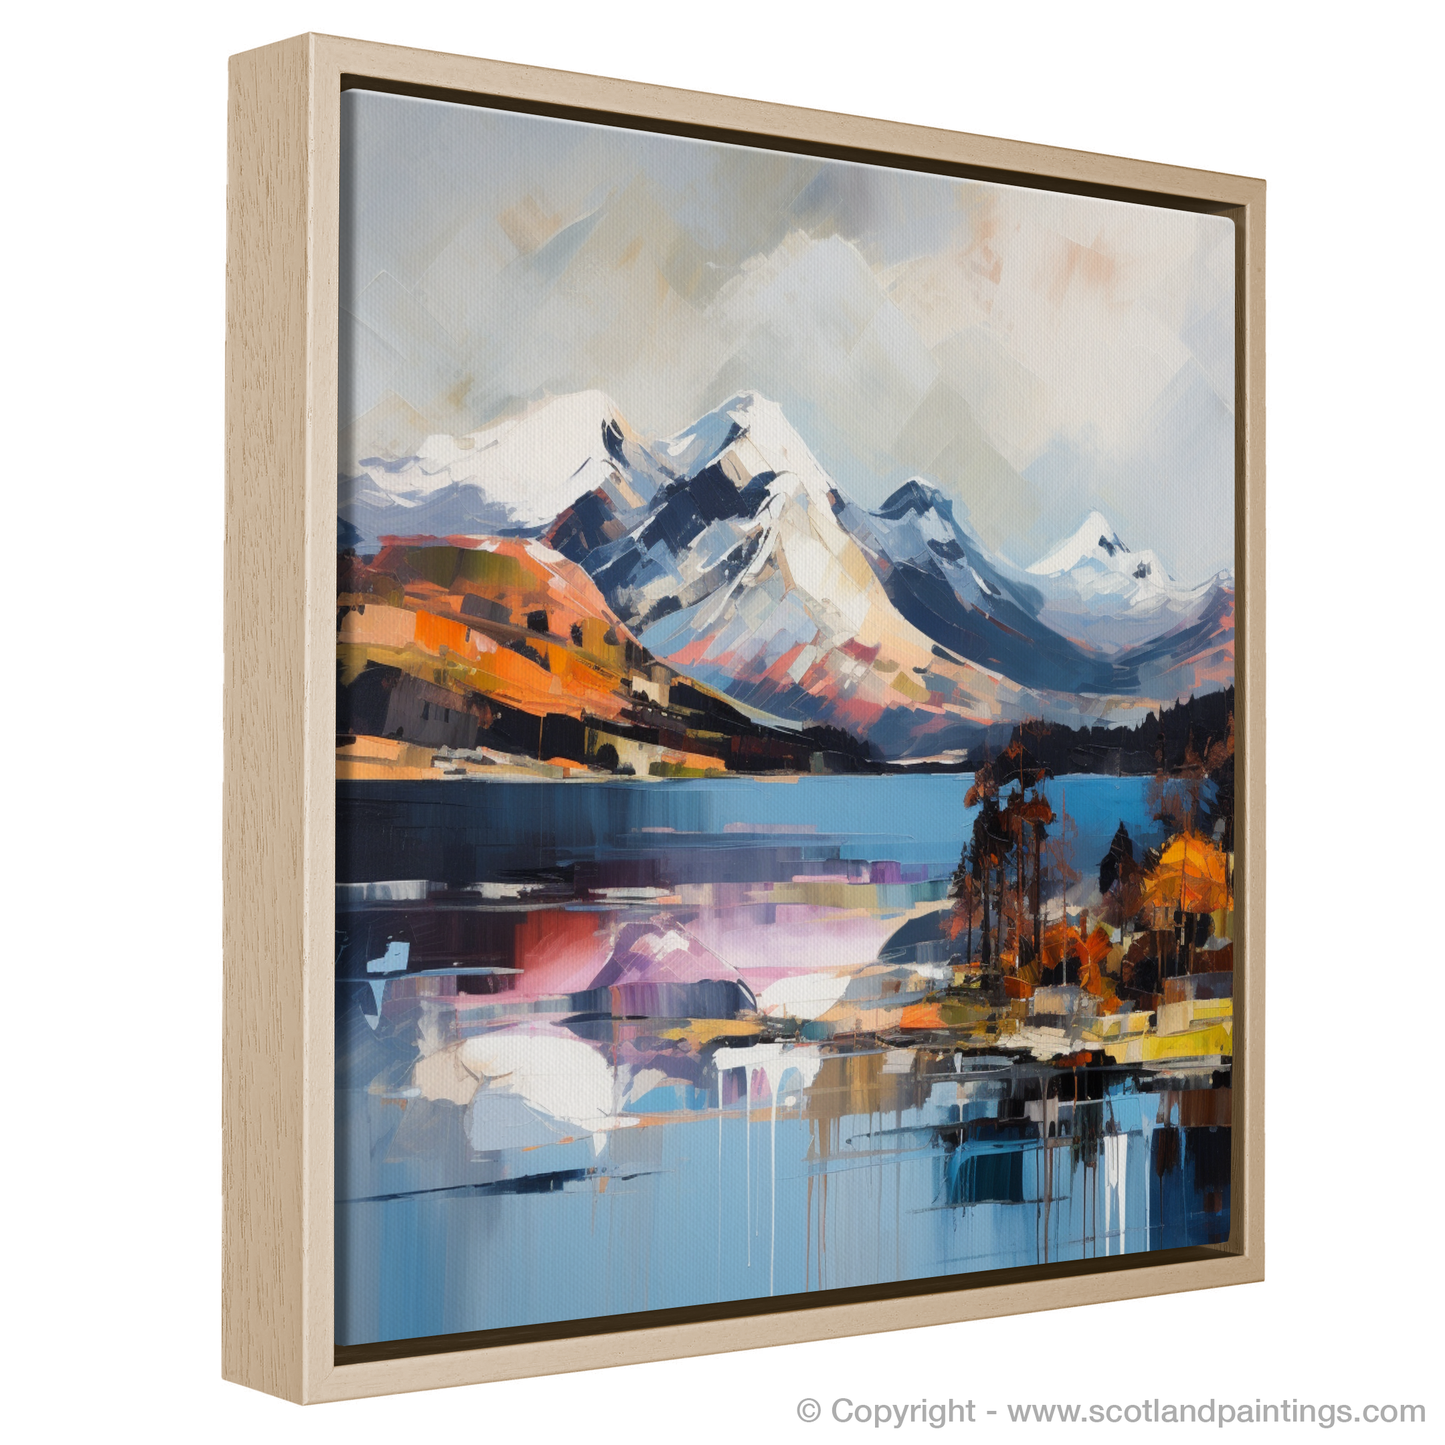 Painting and Art Print of Snow-capped peaks overlooking Loch Lomond entitled "Expressionist Majesty: Snow-capped Peaks Over Loch Lomond".